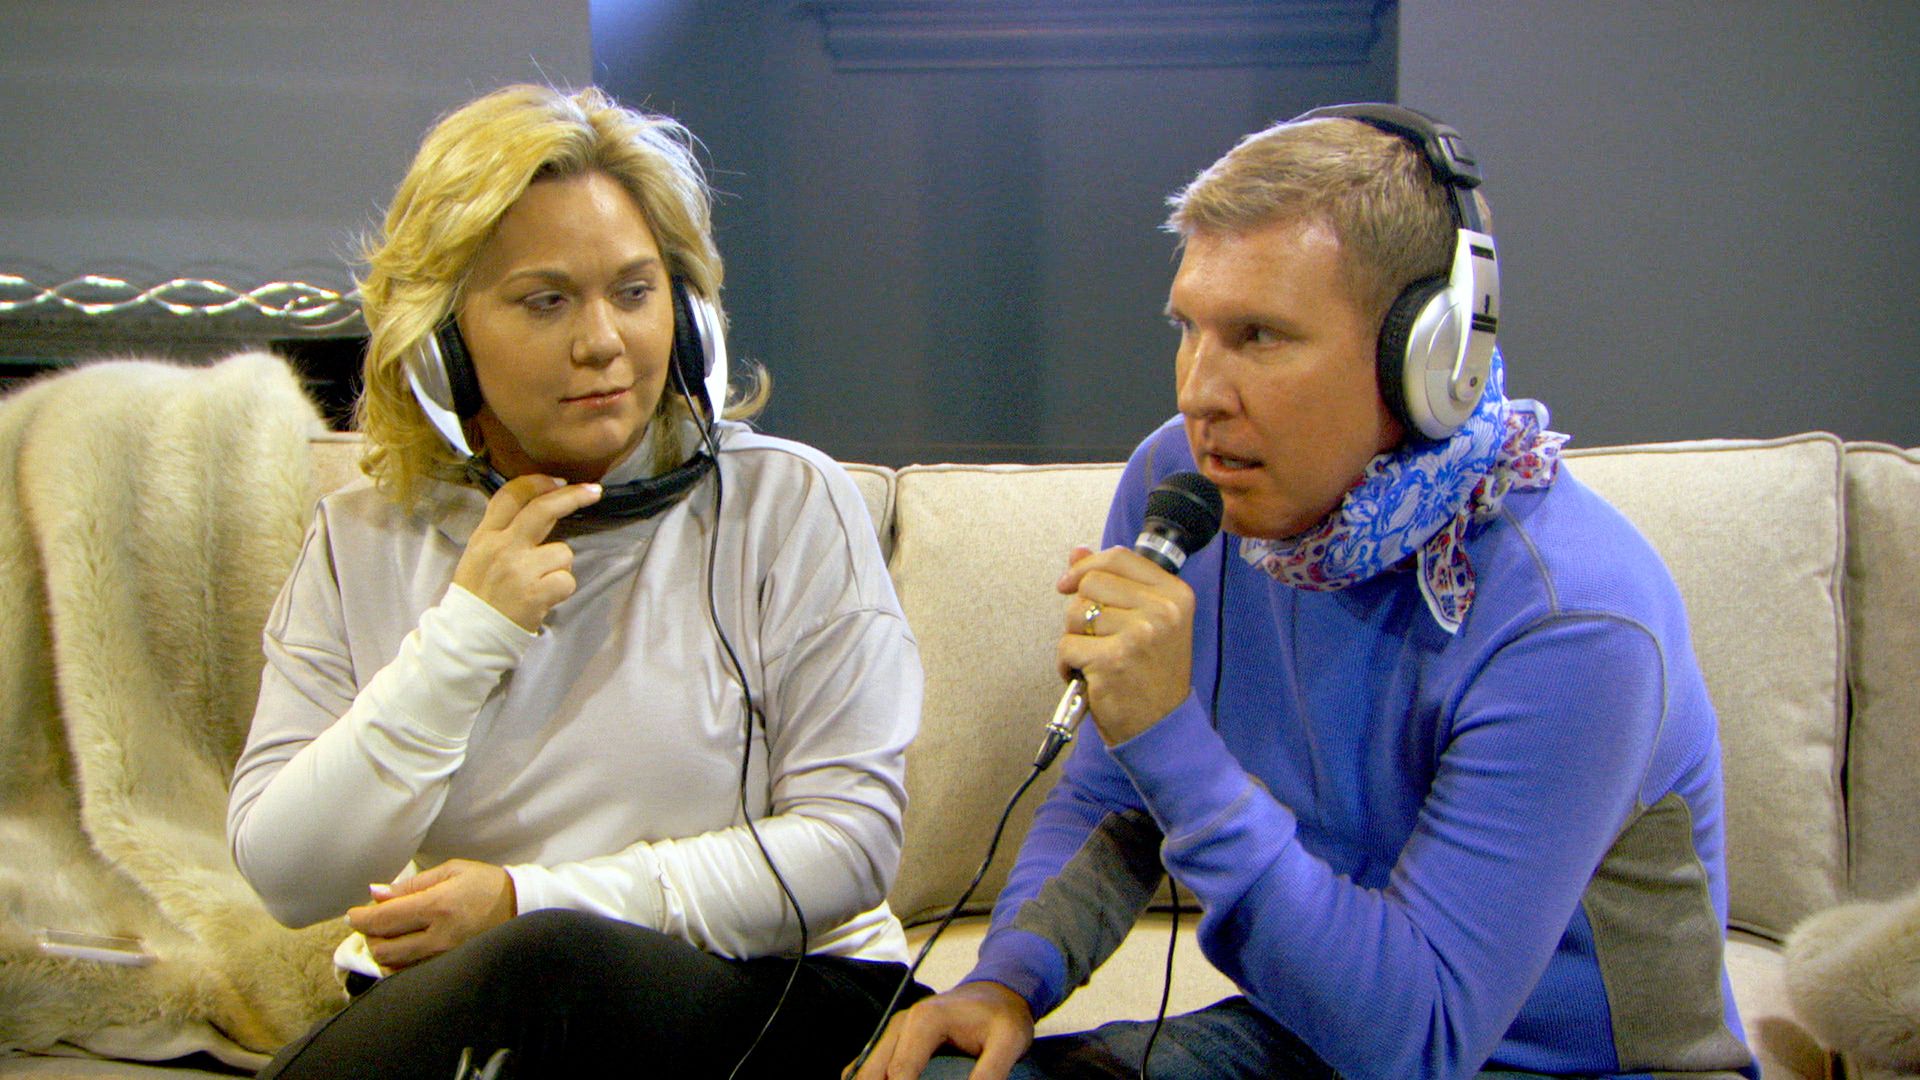 Chrisley Knows Best background